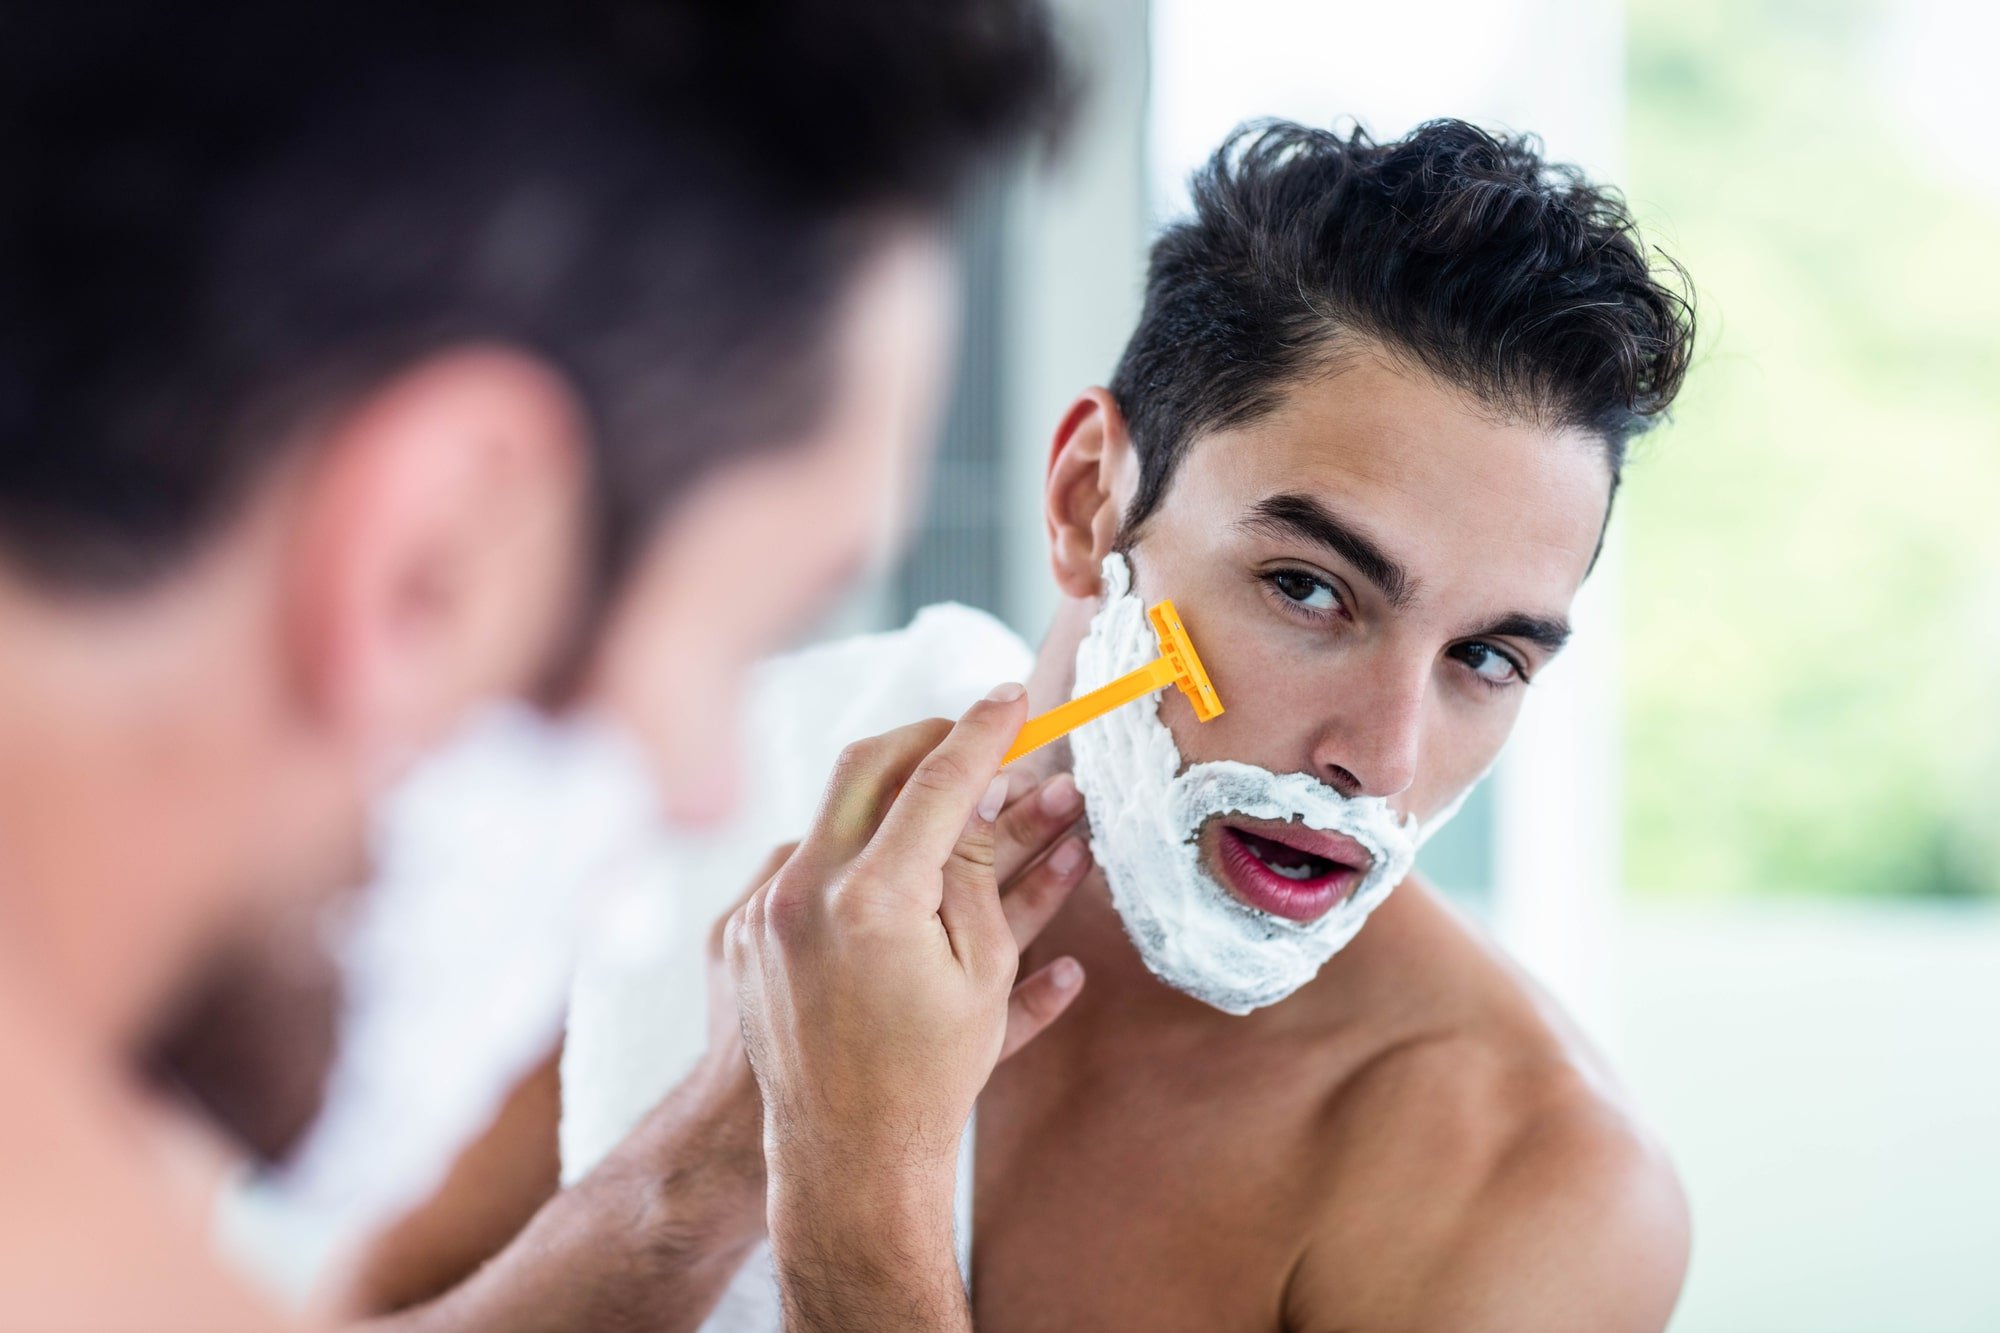 Learn the Best Way to Get a Clean Shave - Face Shaving Guide